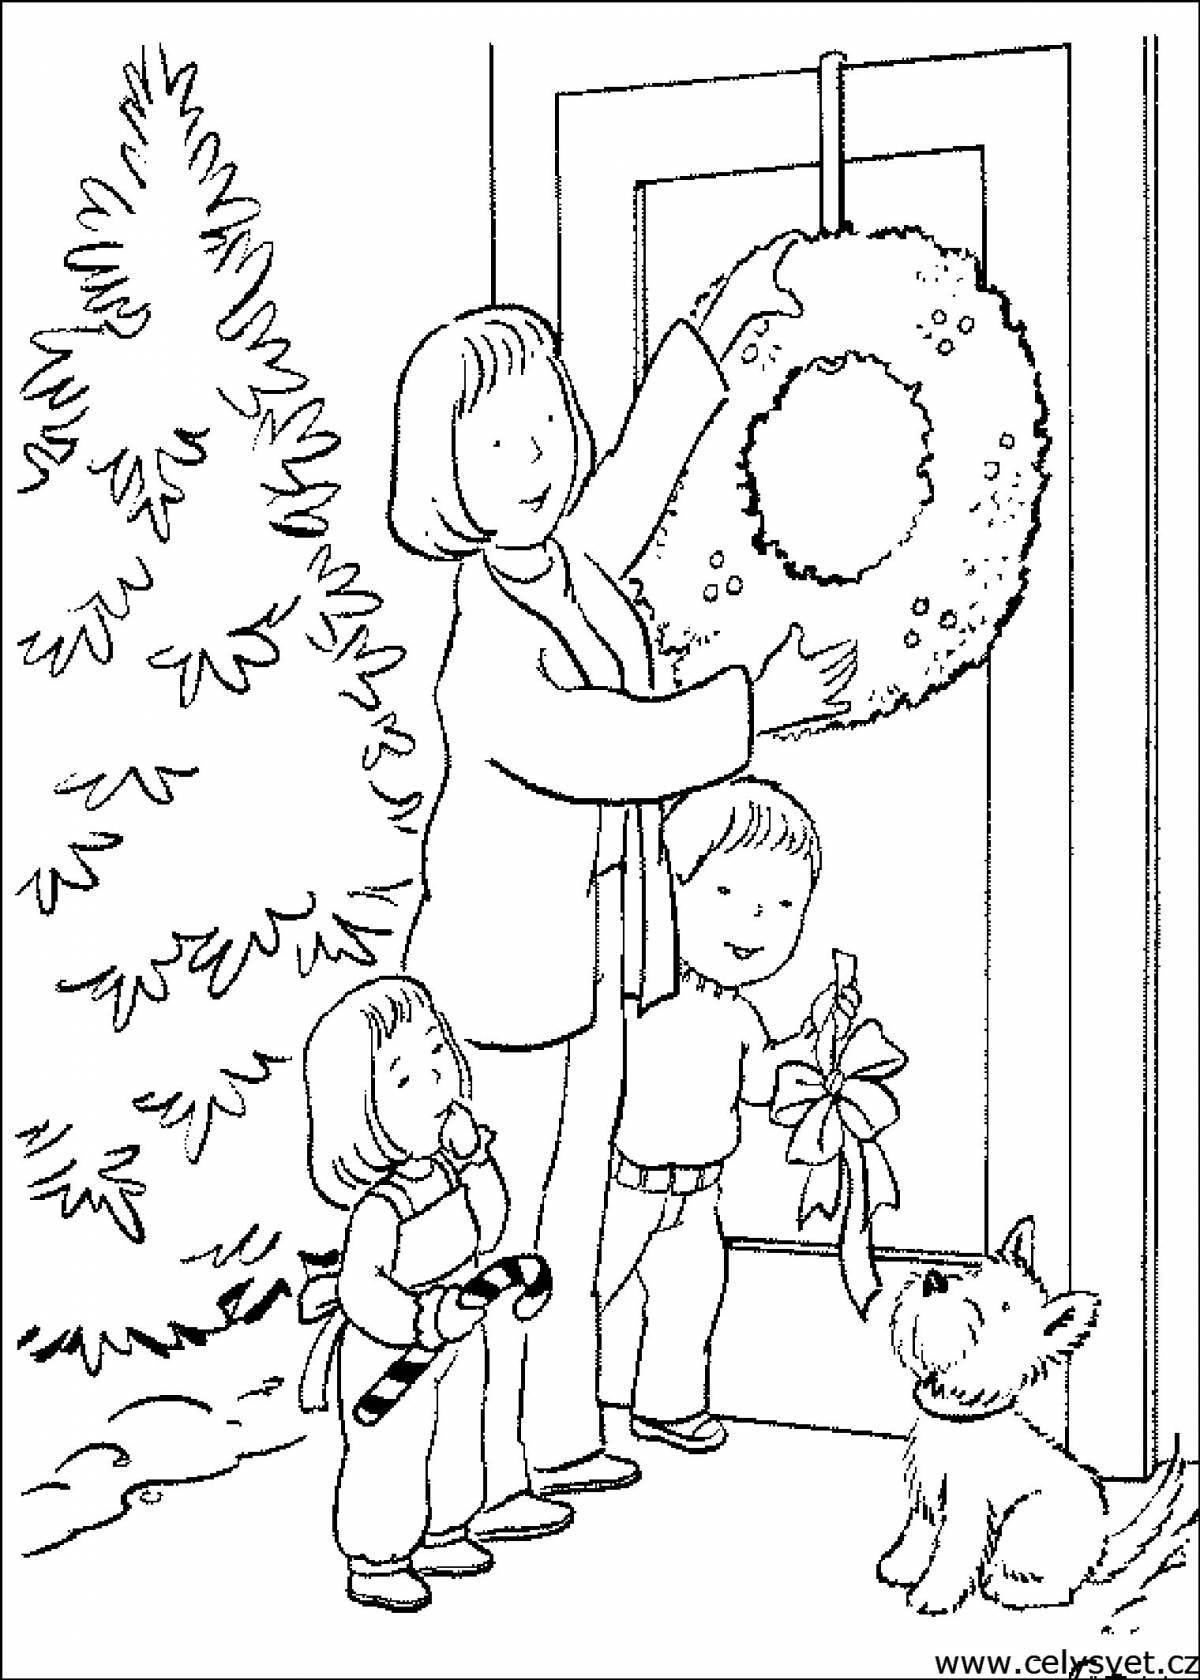 Whimsical Christmas story coloring book